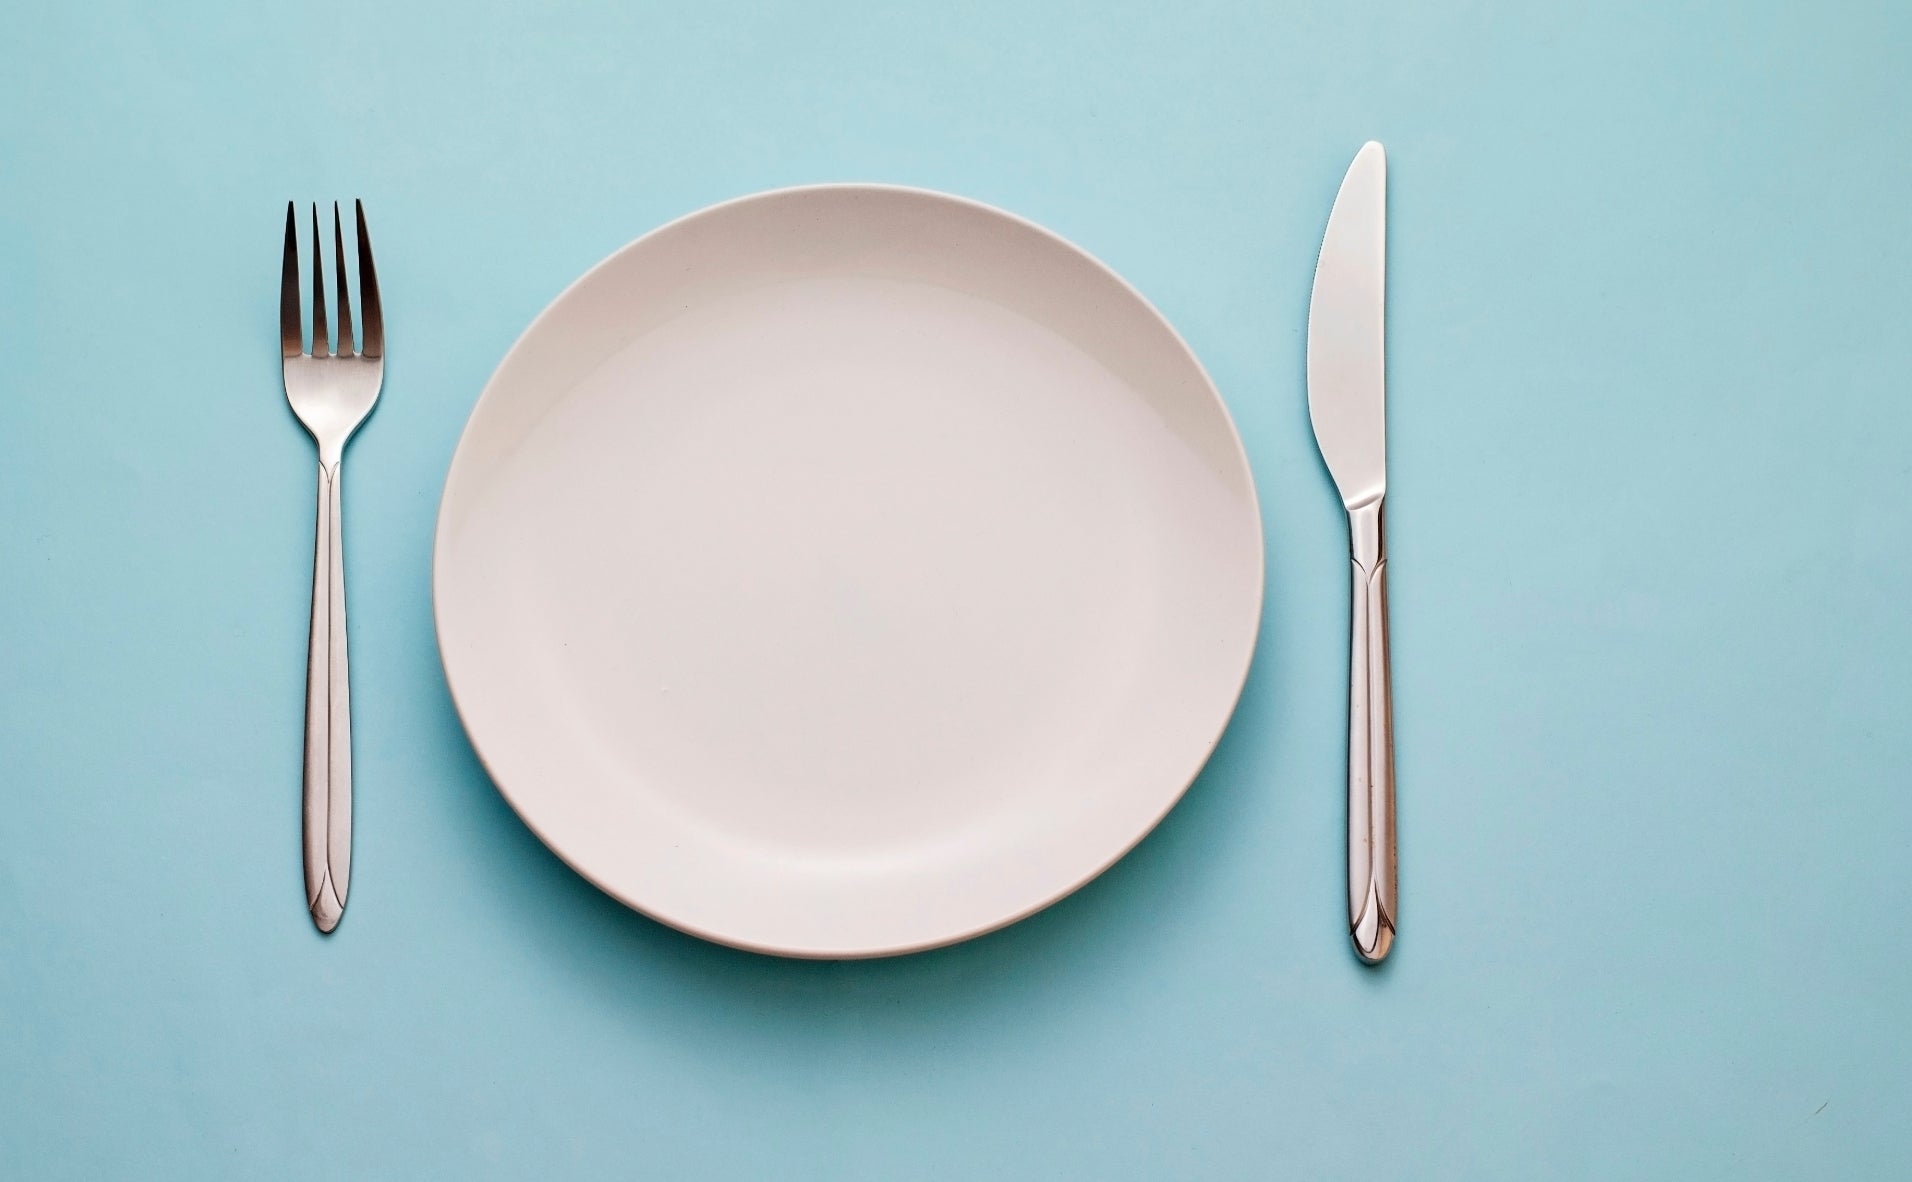 An empty plate sits next to a fork and knife